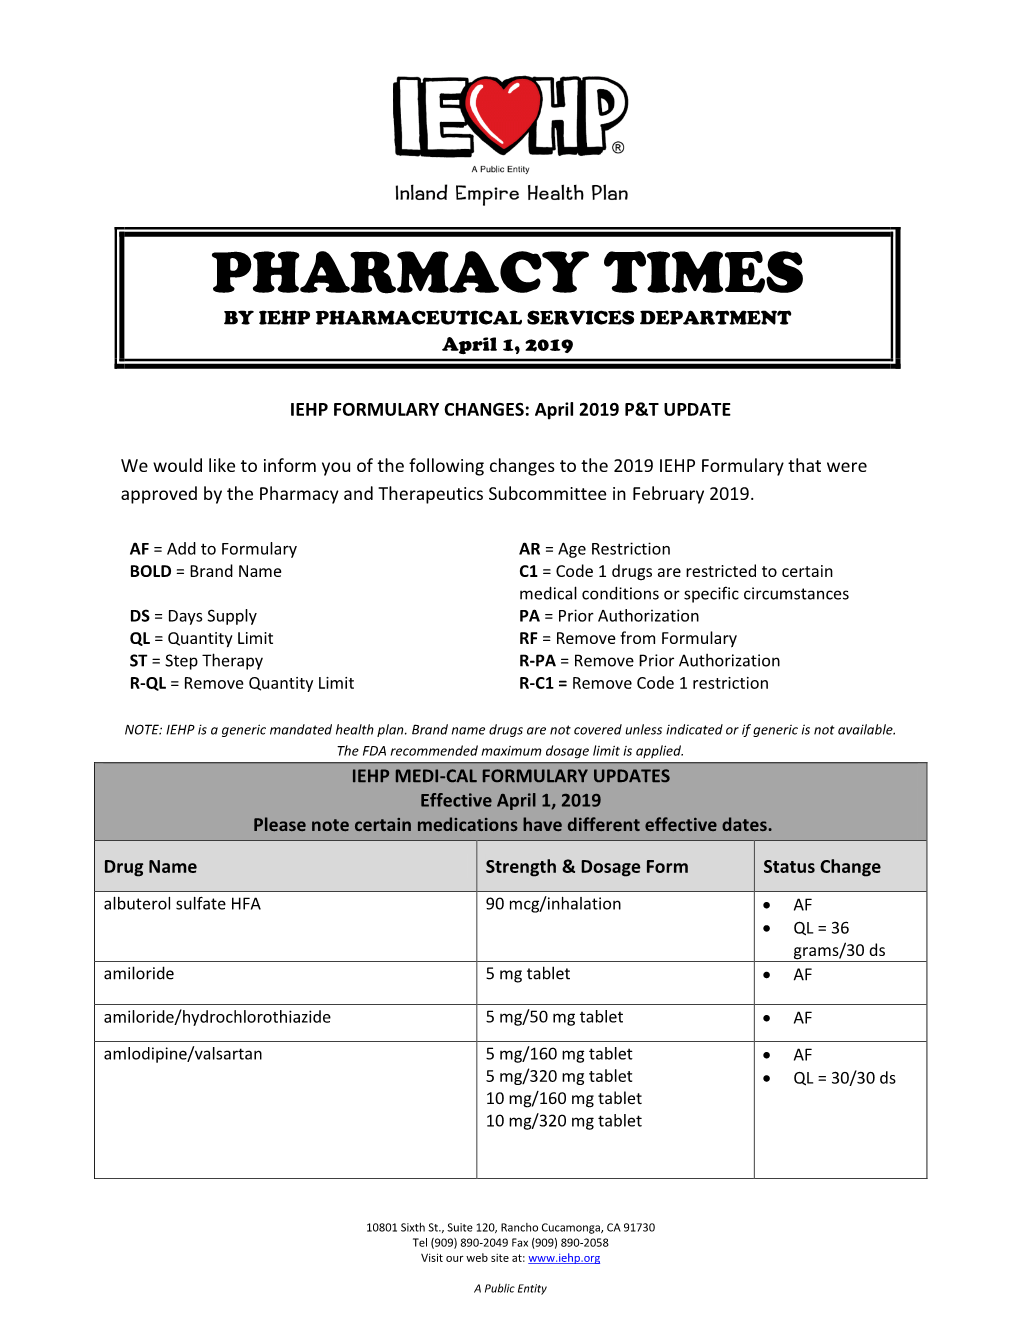 PHARMACY TIMES by IEHP PHARMACEUTICAL SERVICES DEPARTMENT April 1, 2019